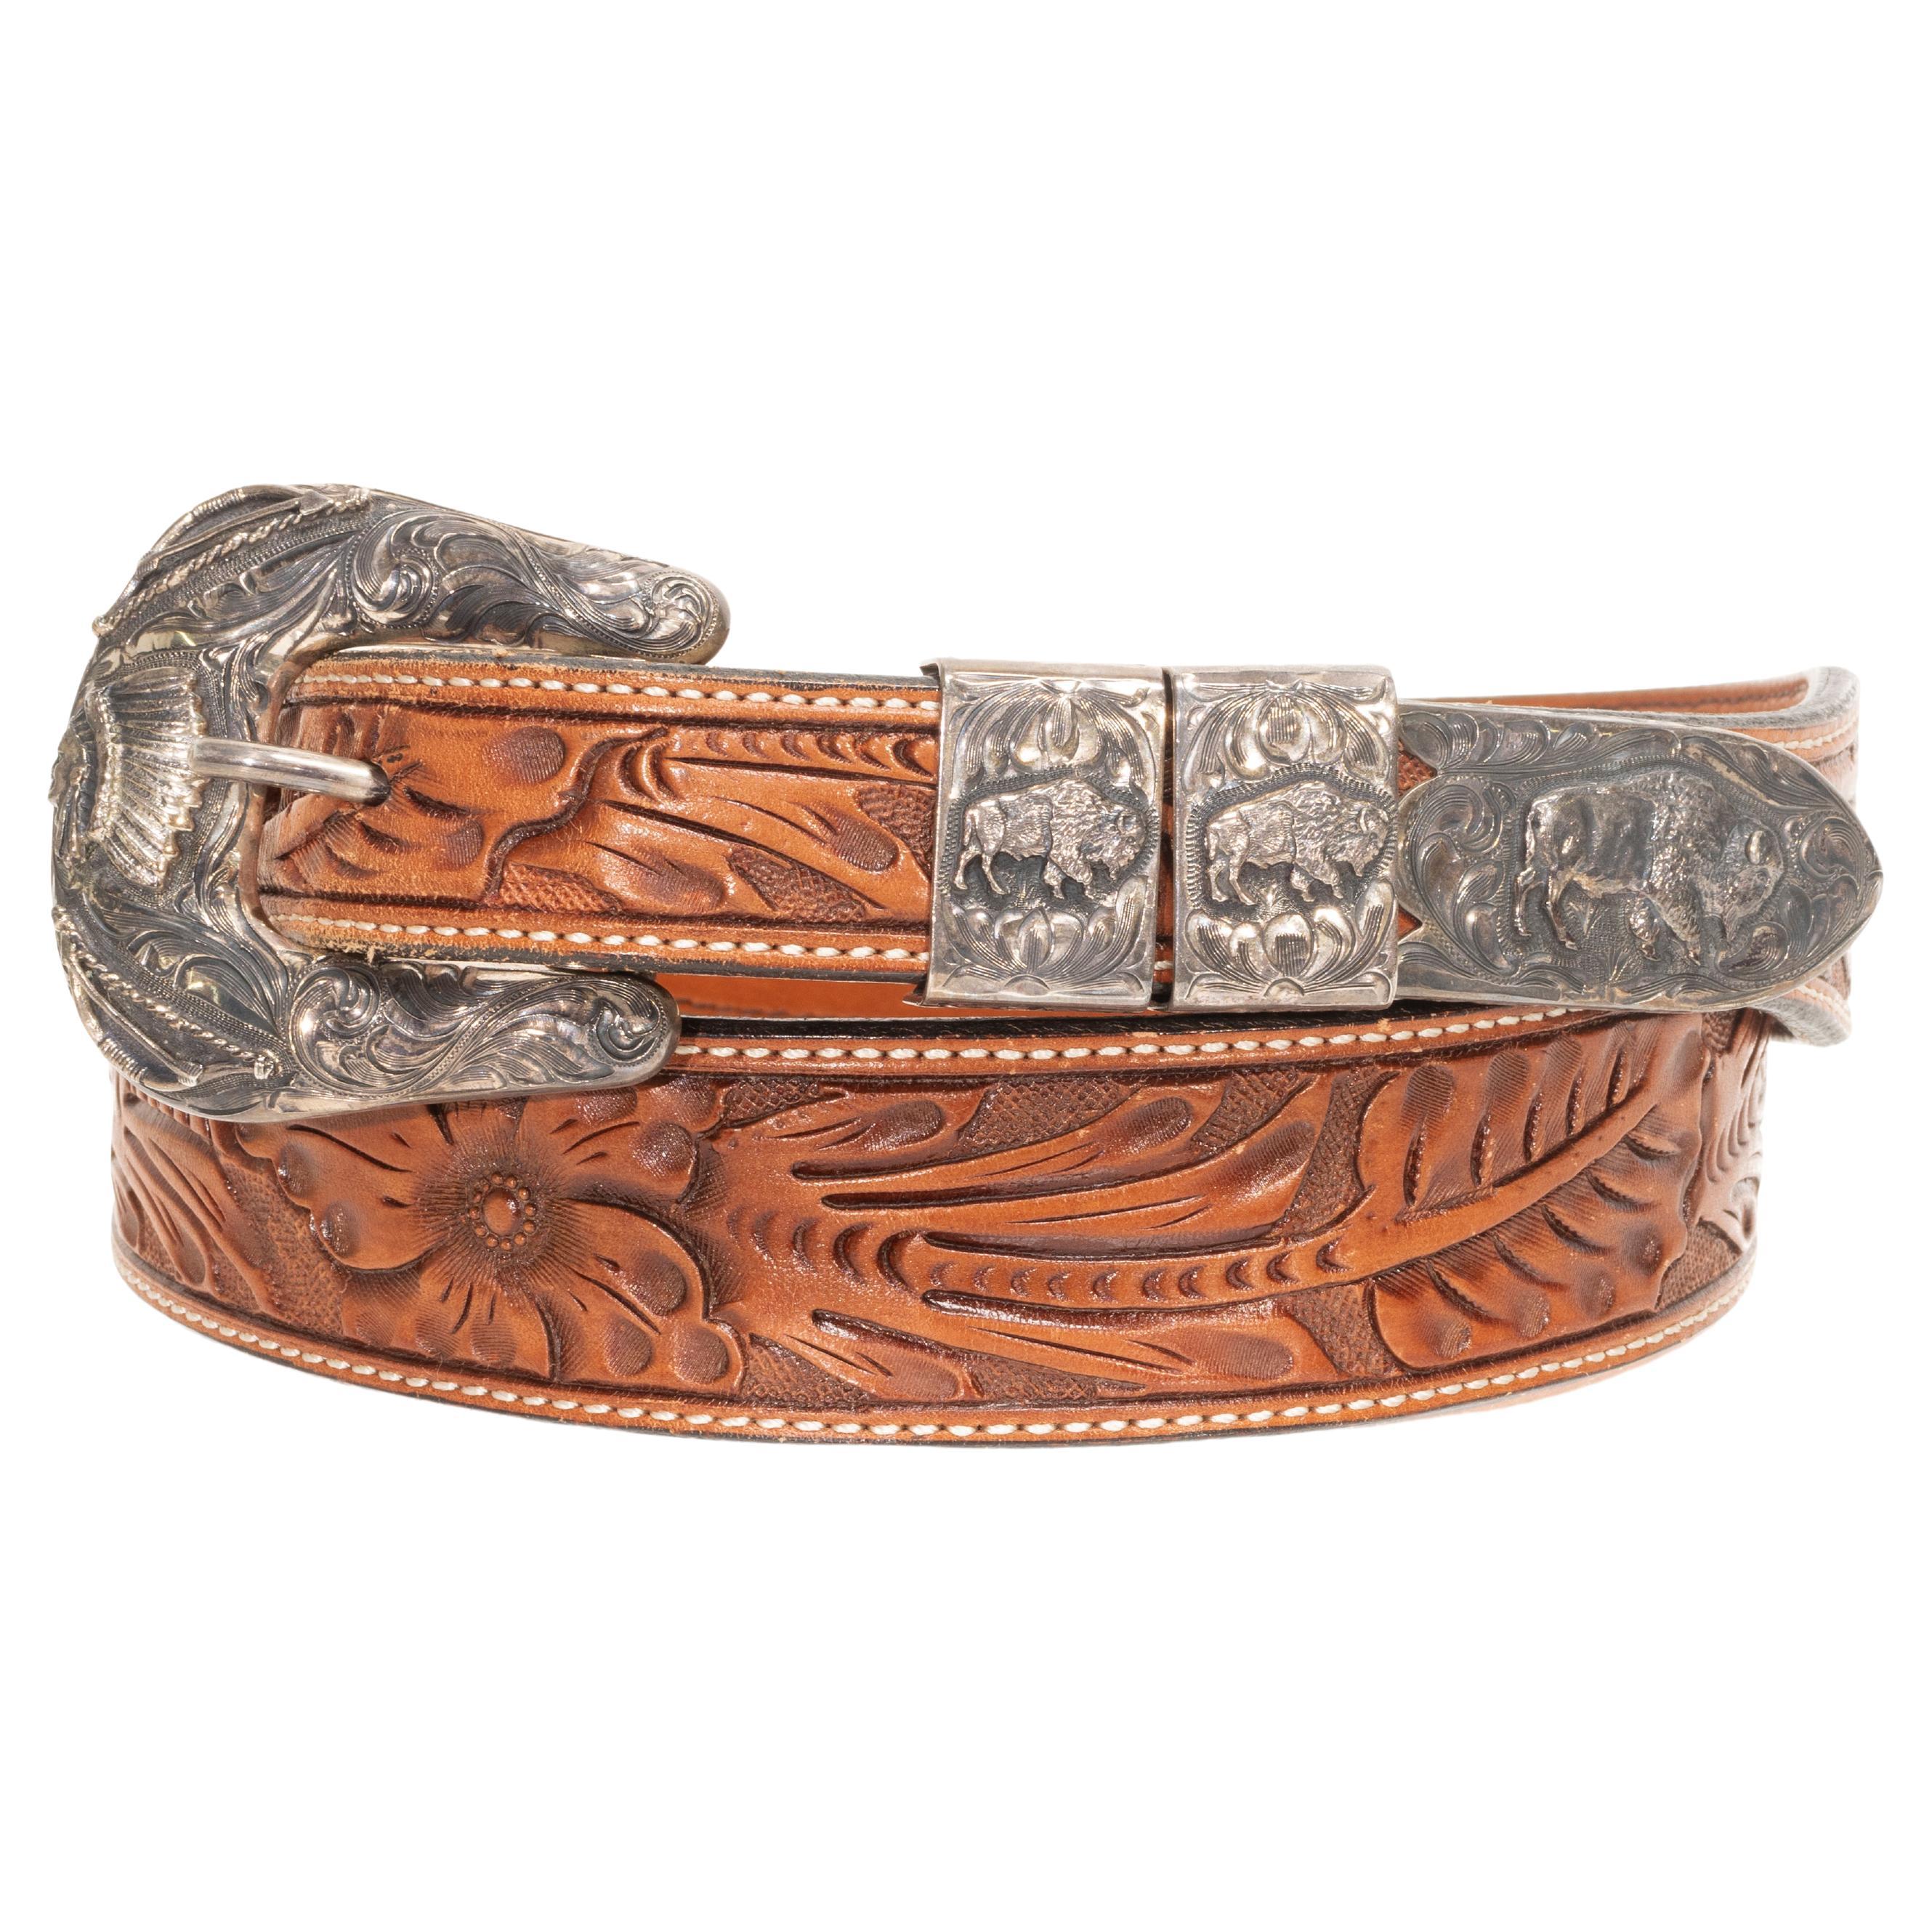 Chief and Buffalos Sterling Buckle on Vogt Belt For Sale